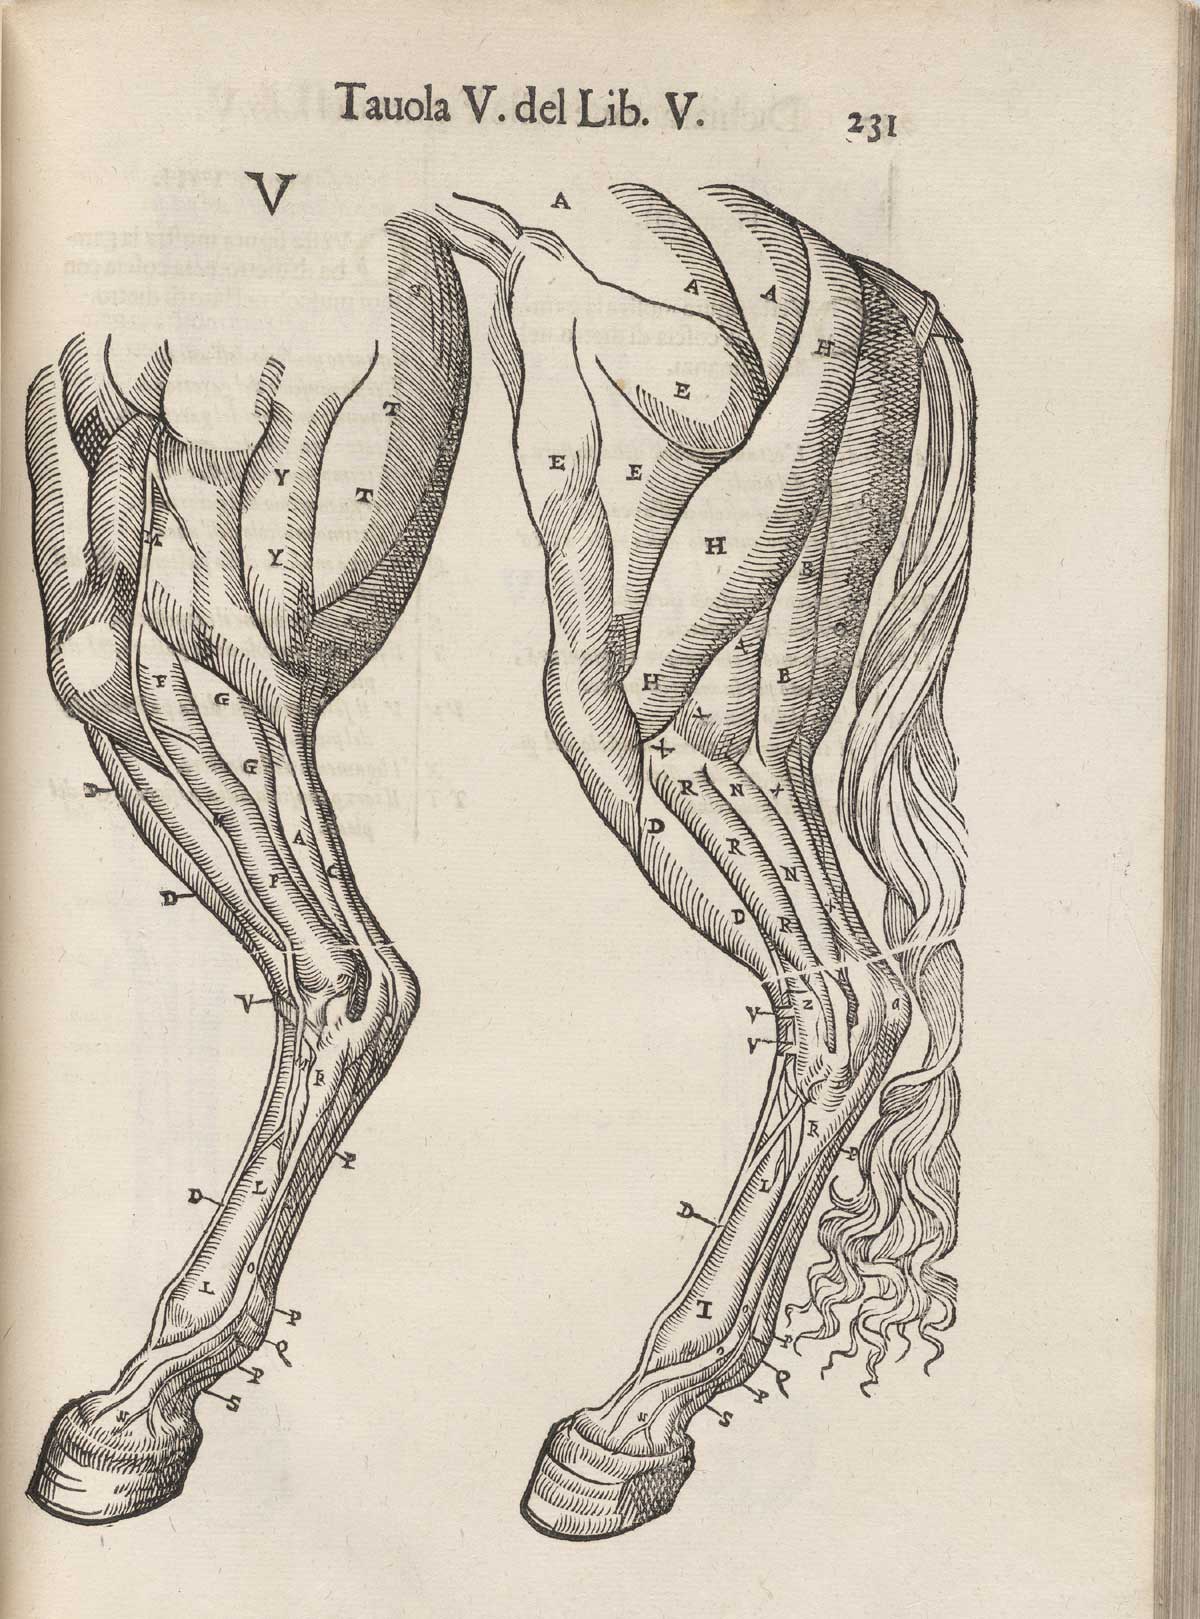 Page 231 of Ruini's Anatomia del cavallo, infermità, et suoi rimedii, featuring left side views of the muscles in the front and hind legs of a horse.